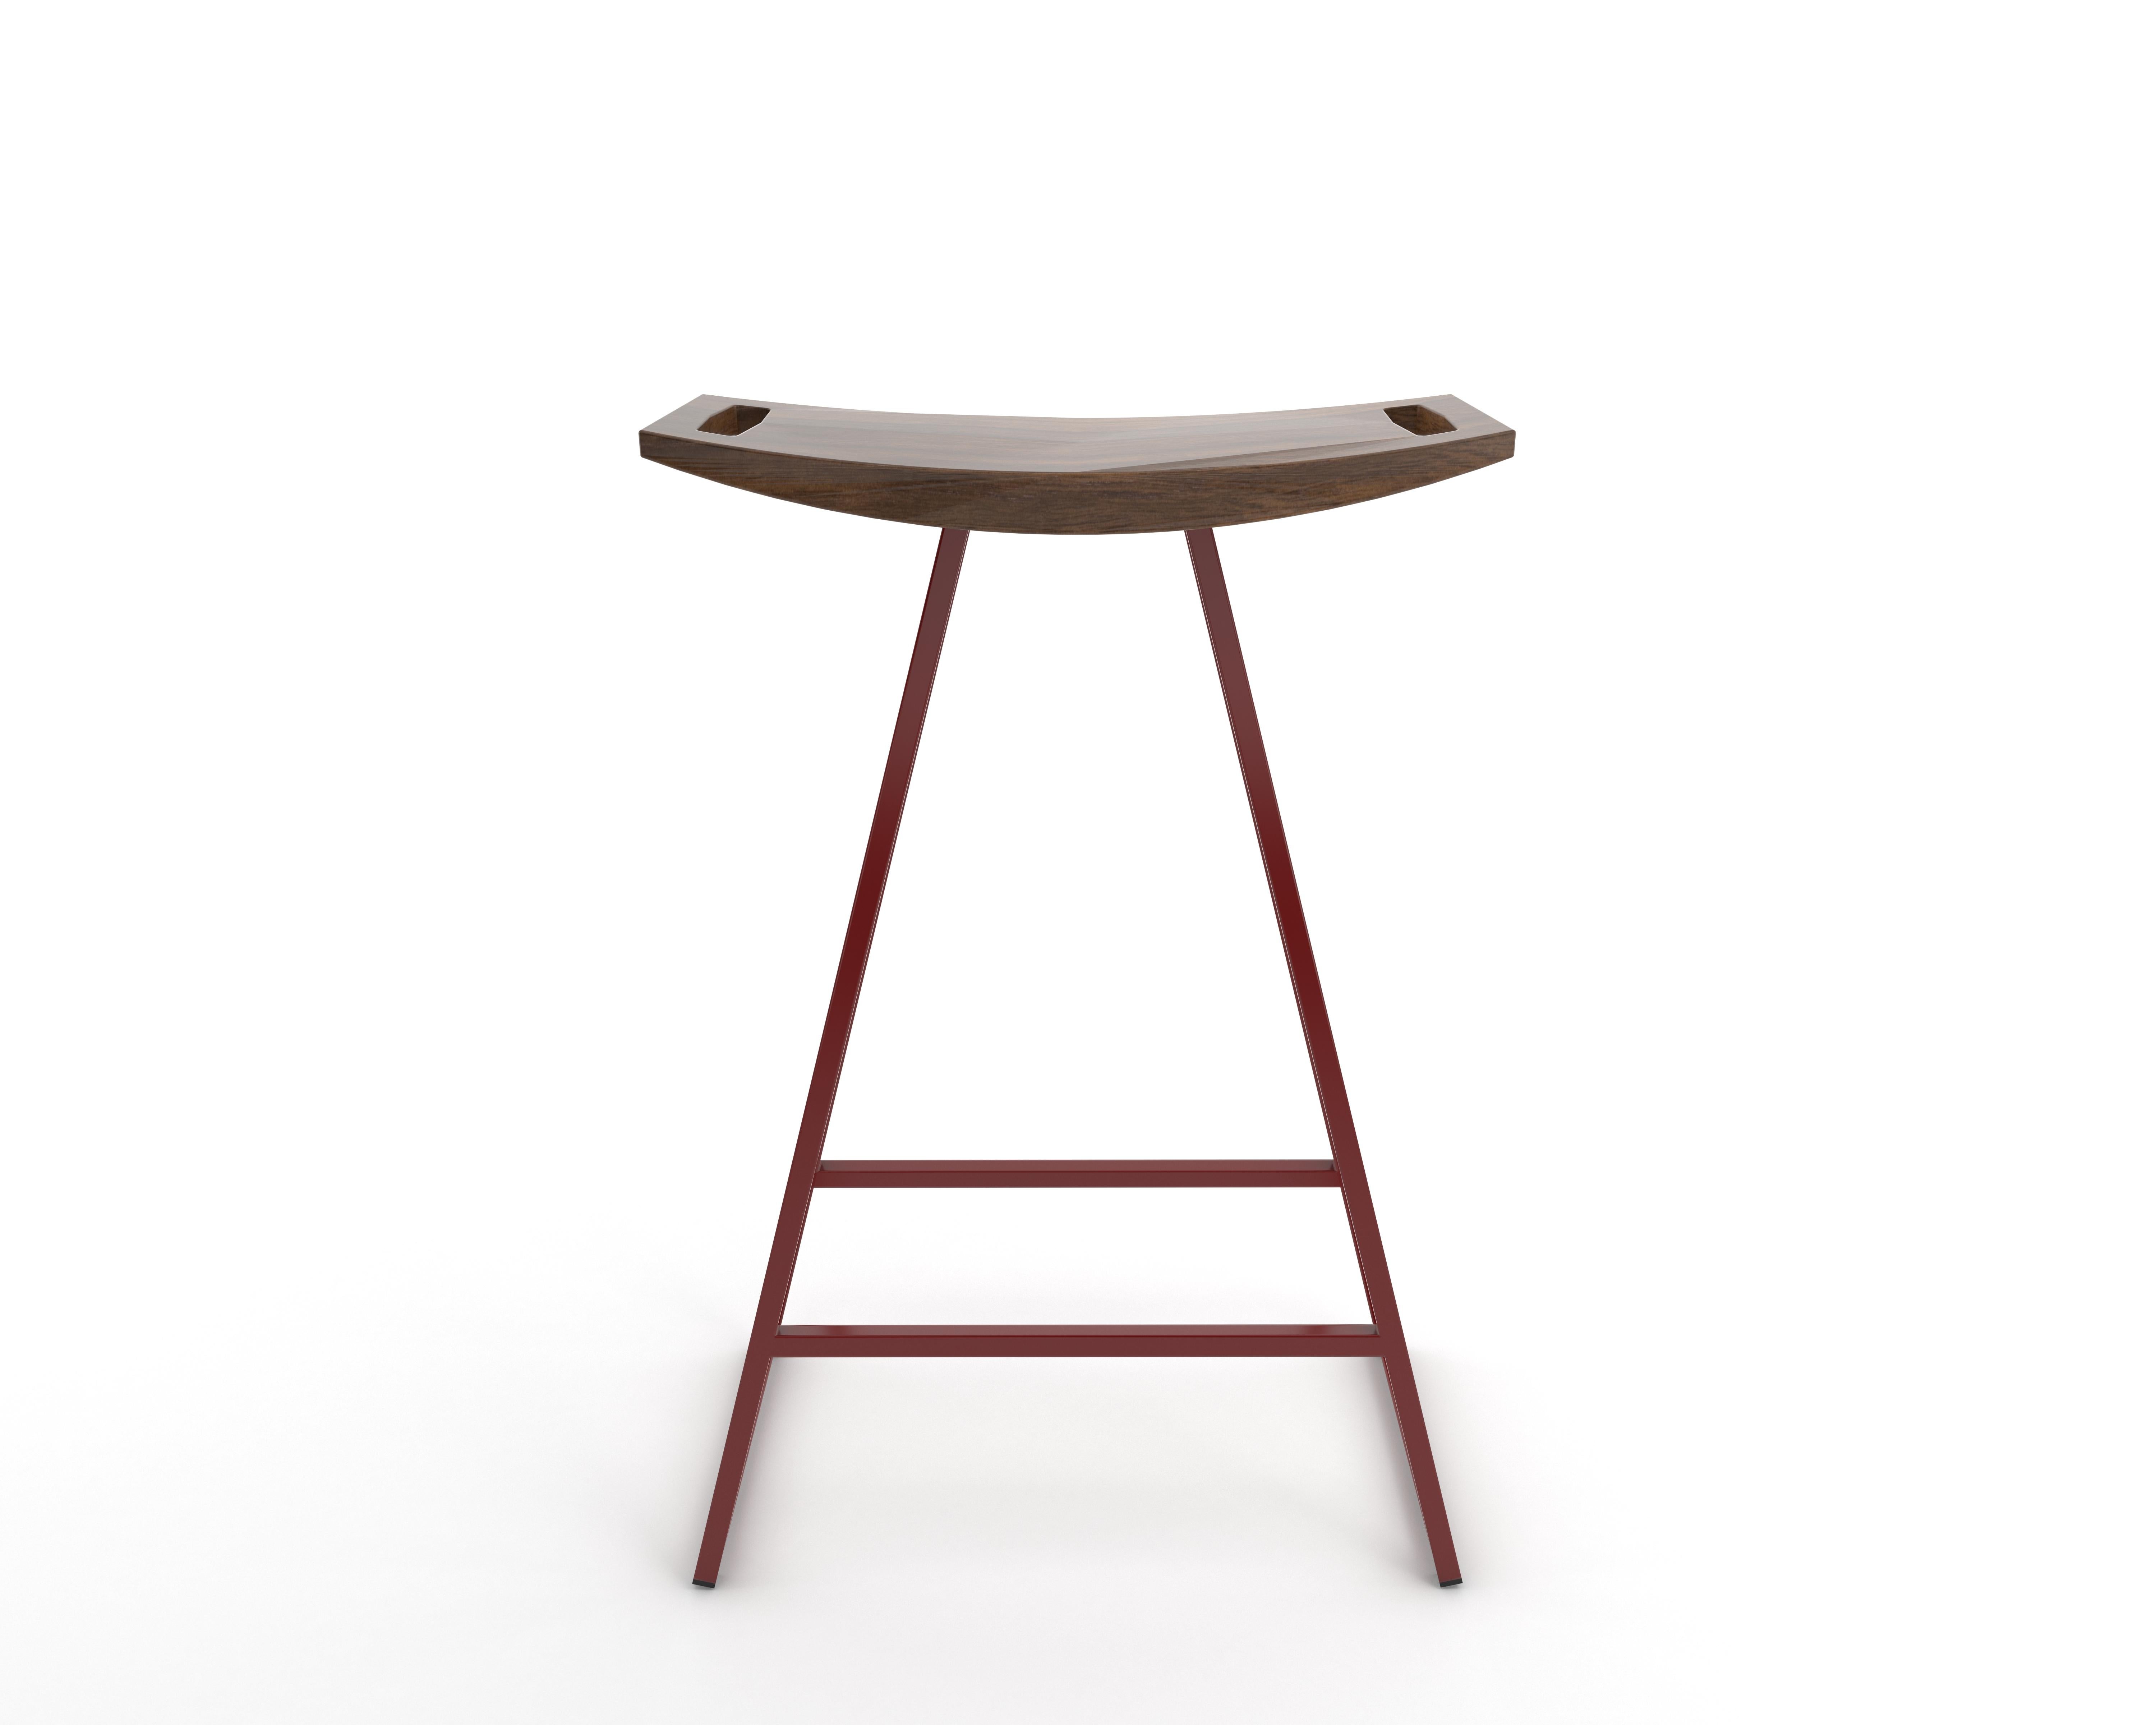 This sleek stool has a thin carved wooden seat that rests on a steel tubing base. The elegant seat is curved for seamless comfort while displaying a stunning intersecting diagonal accent inlay. This eye-catching and durable piece will make any